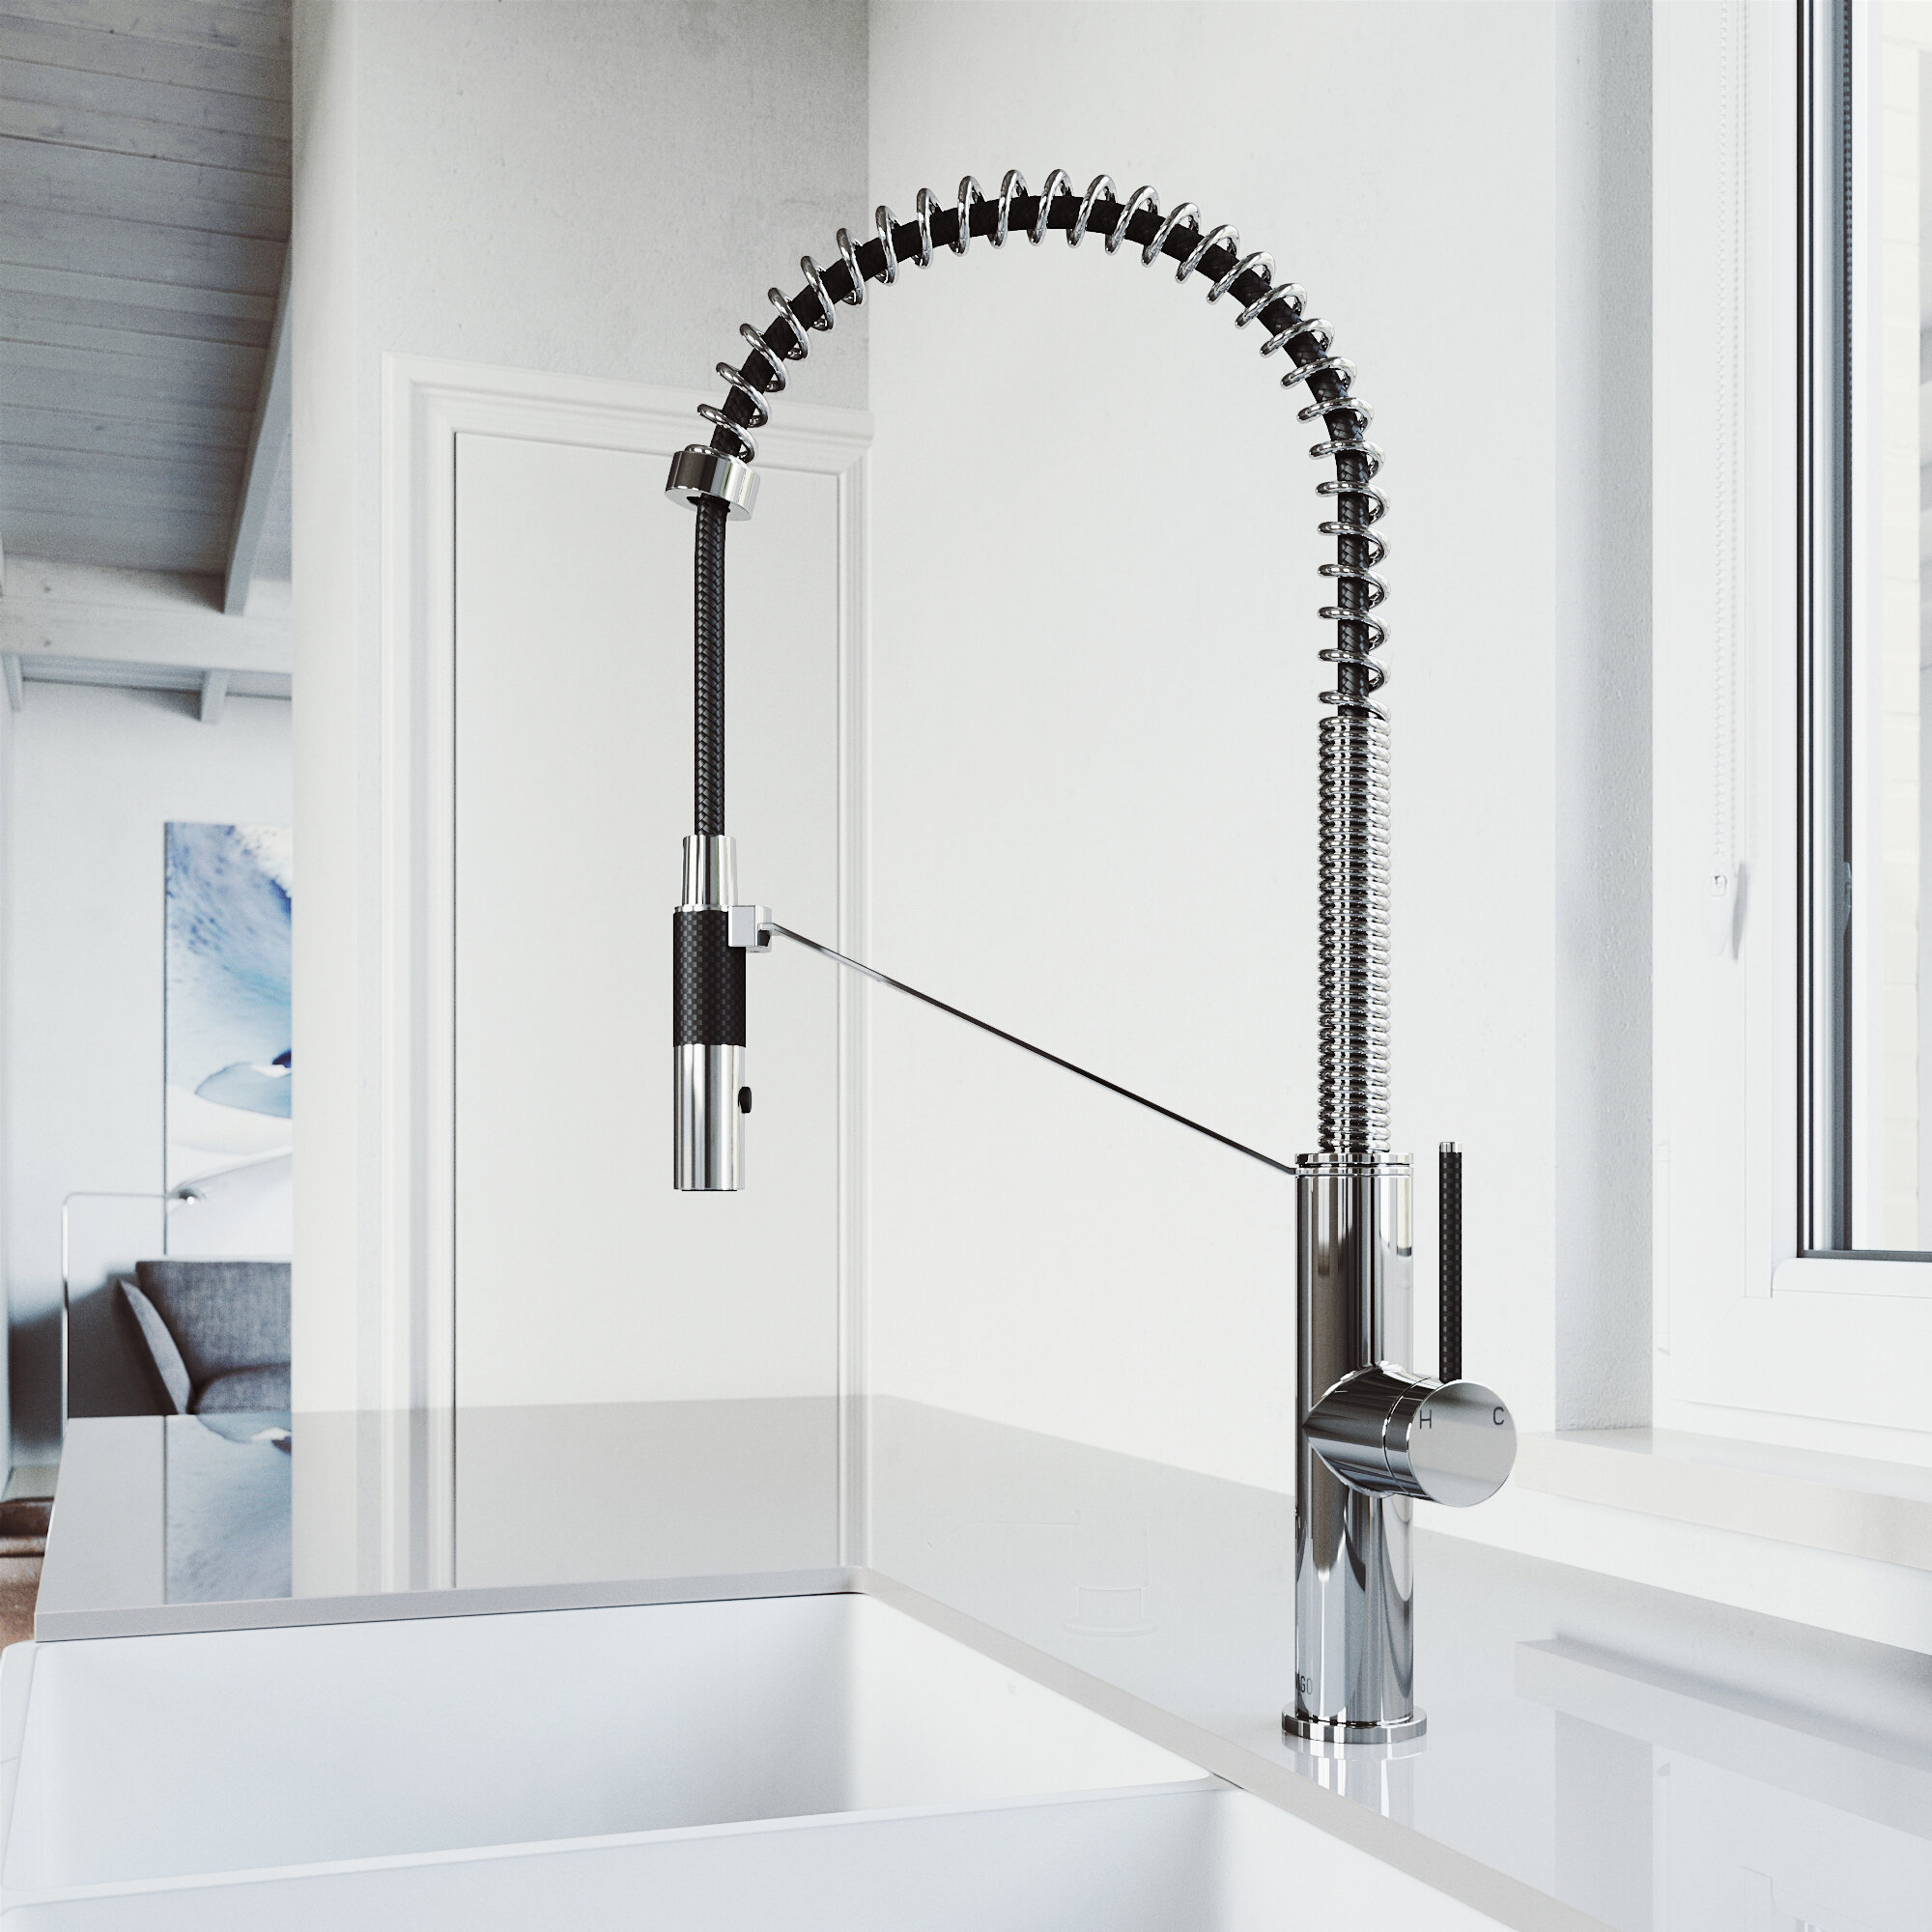 Livingston Magnetic Pull Down Single Handle Kitchen Faucet